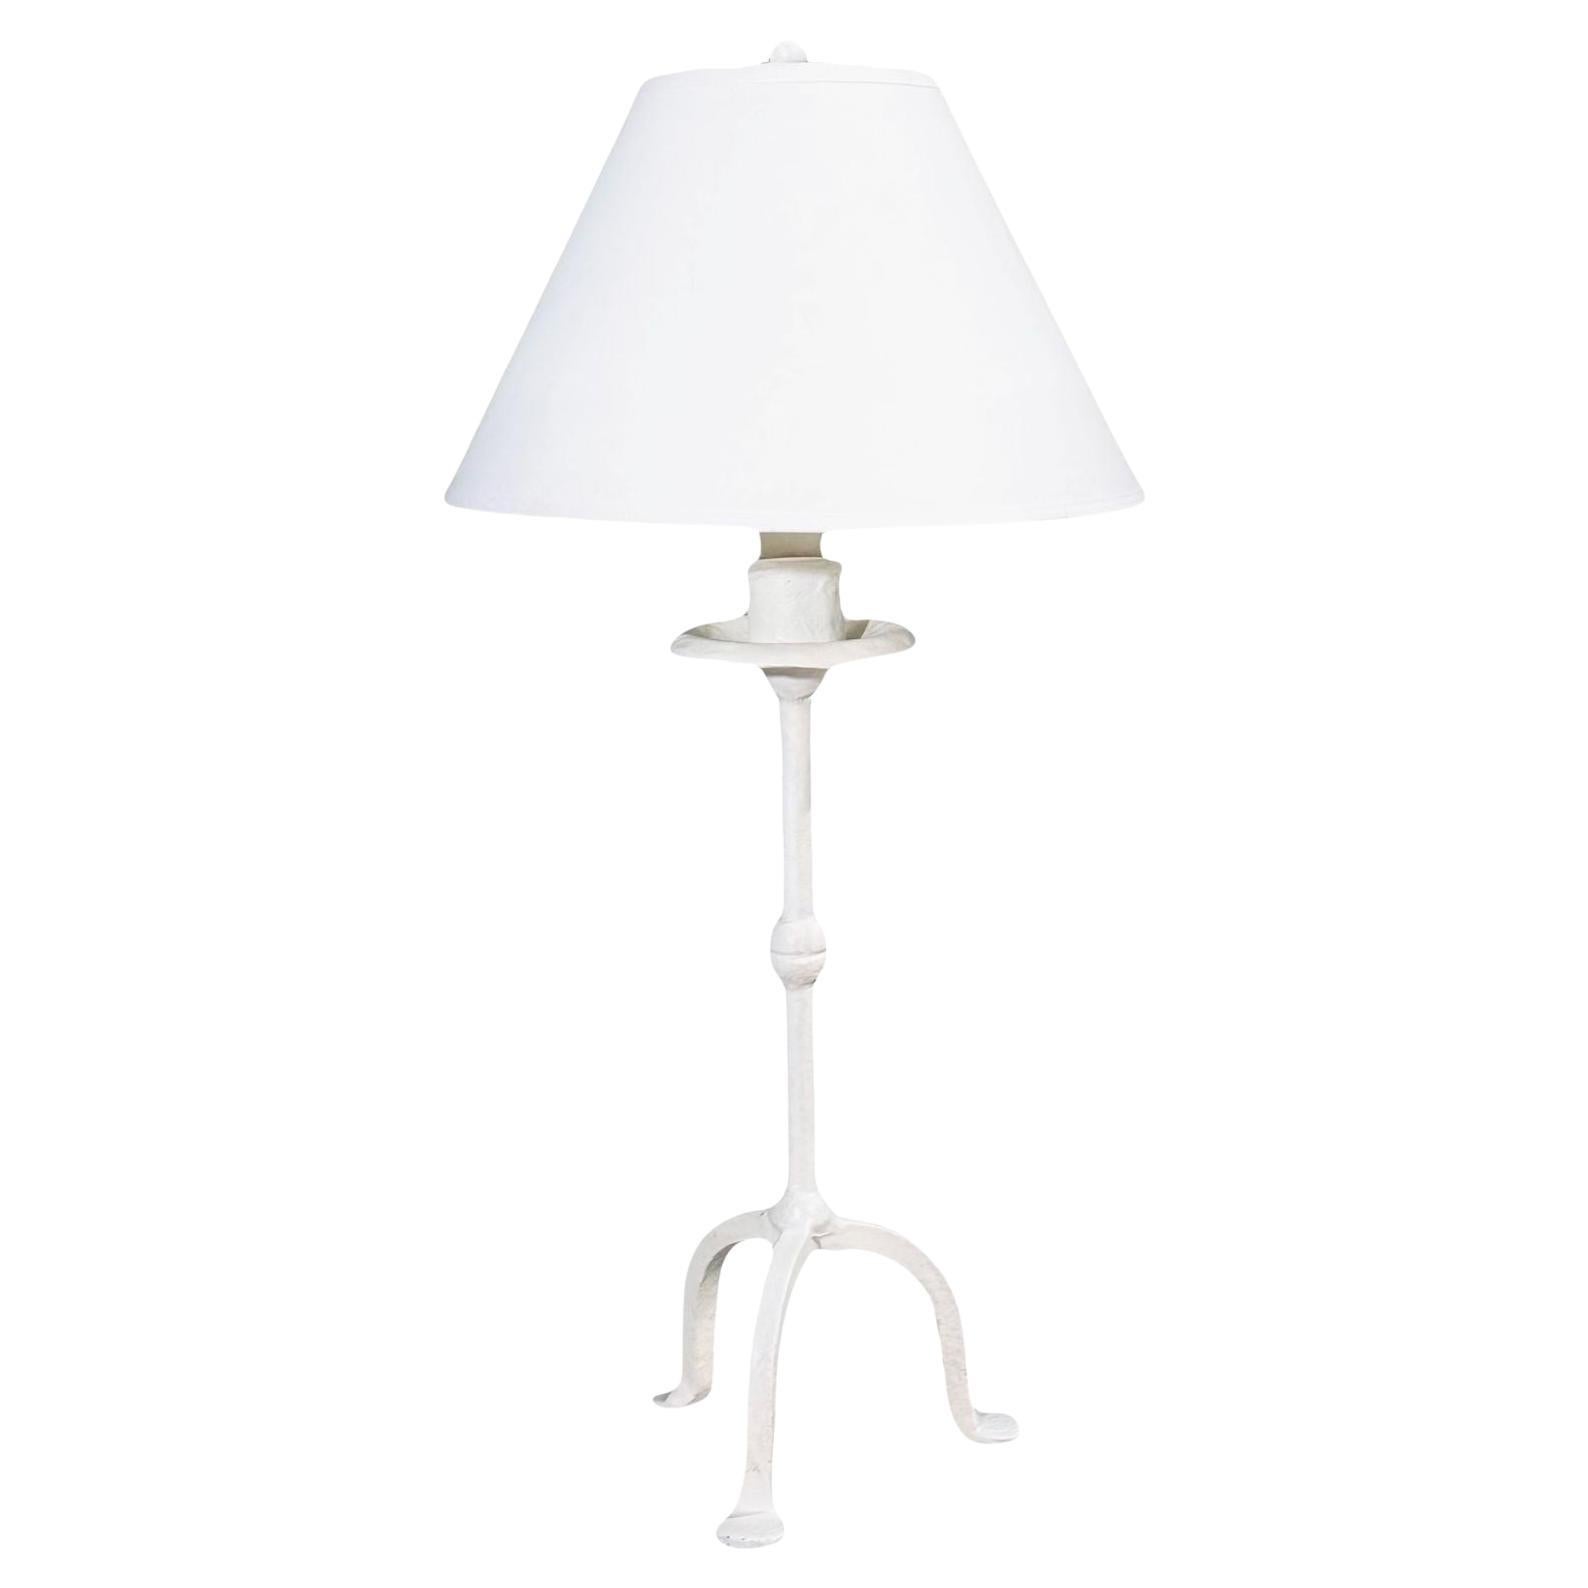 Giacometti Style Plaster Table Lamp, 1960 For Sale